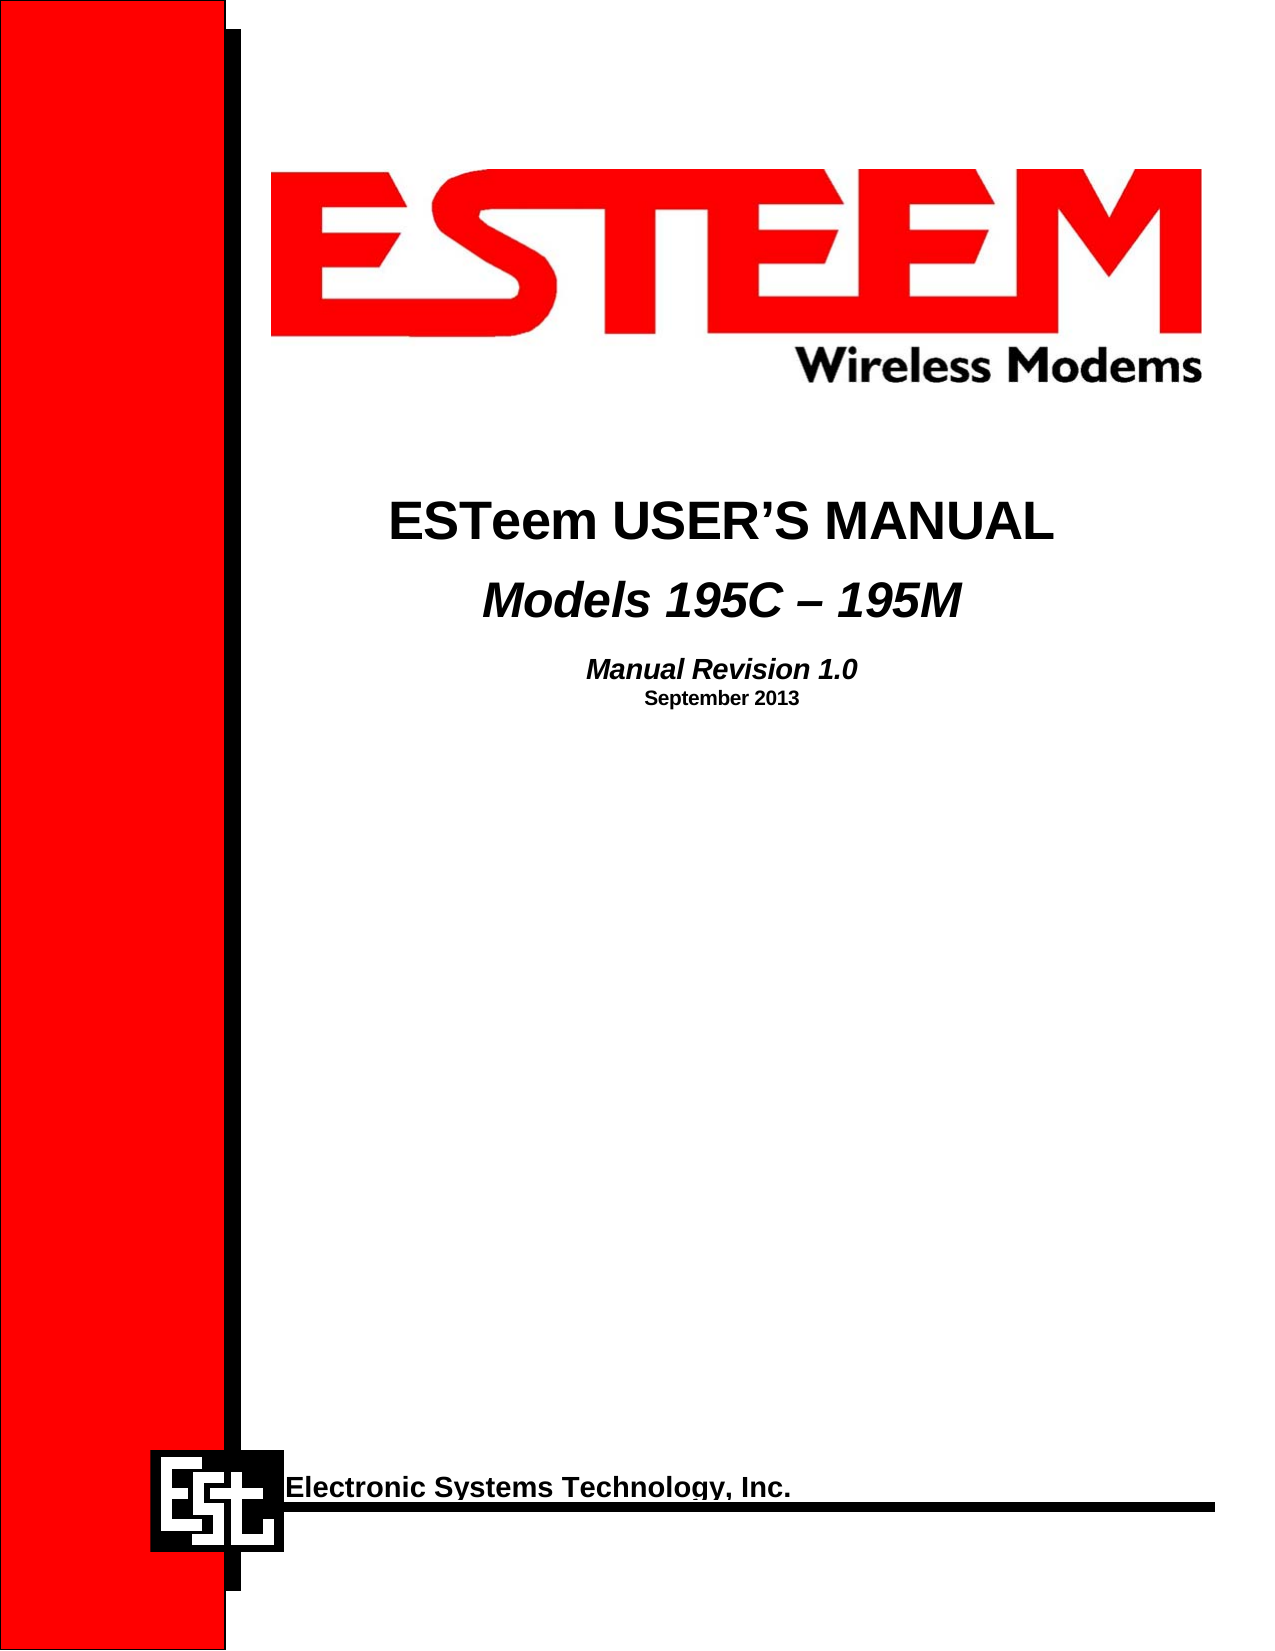                 ESTeem USER’S MANUAL  Models 195C – 195M   Manual Revision 1.0 September 2013      Electronic Systems Technology, Inc.